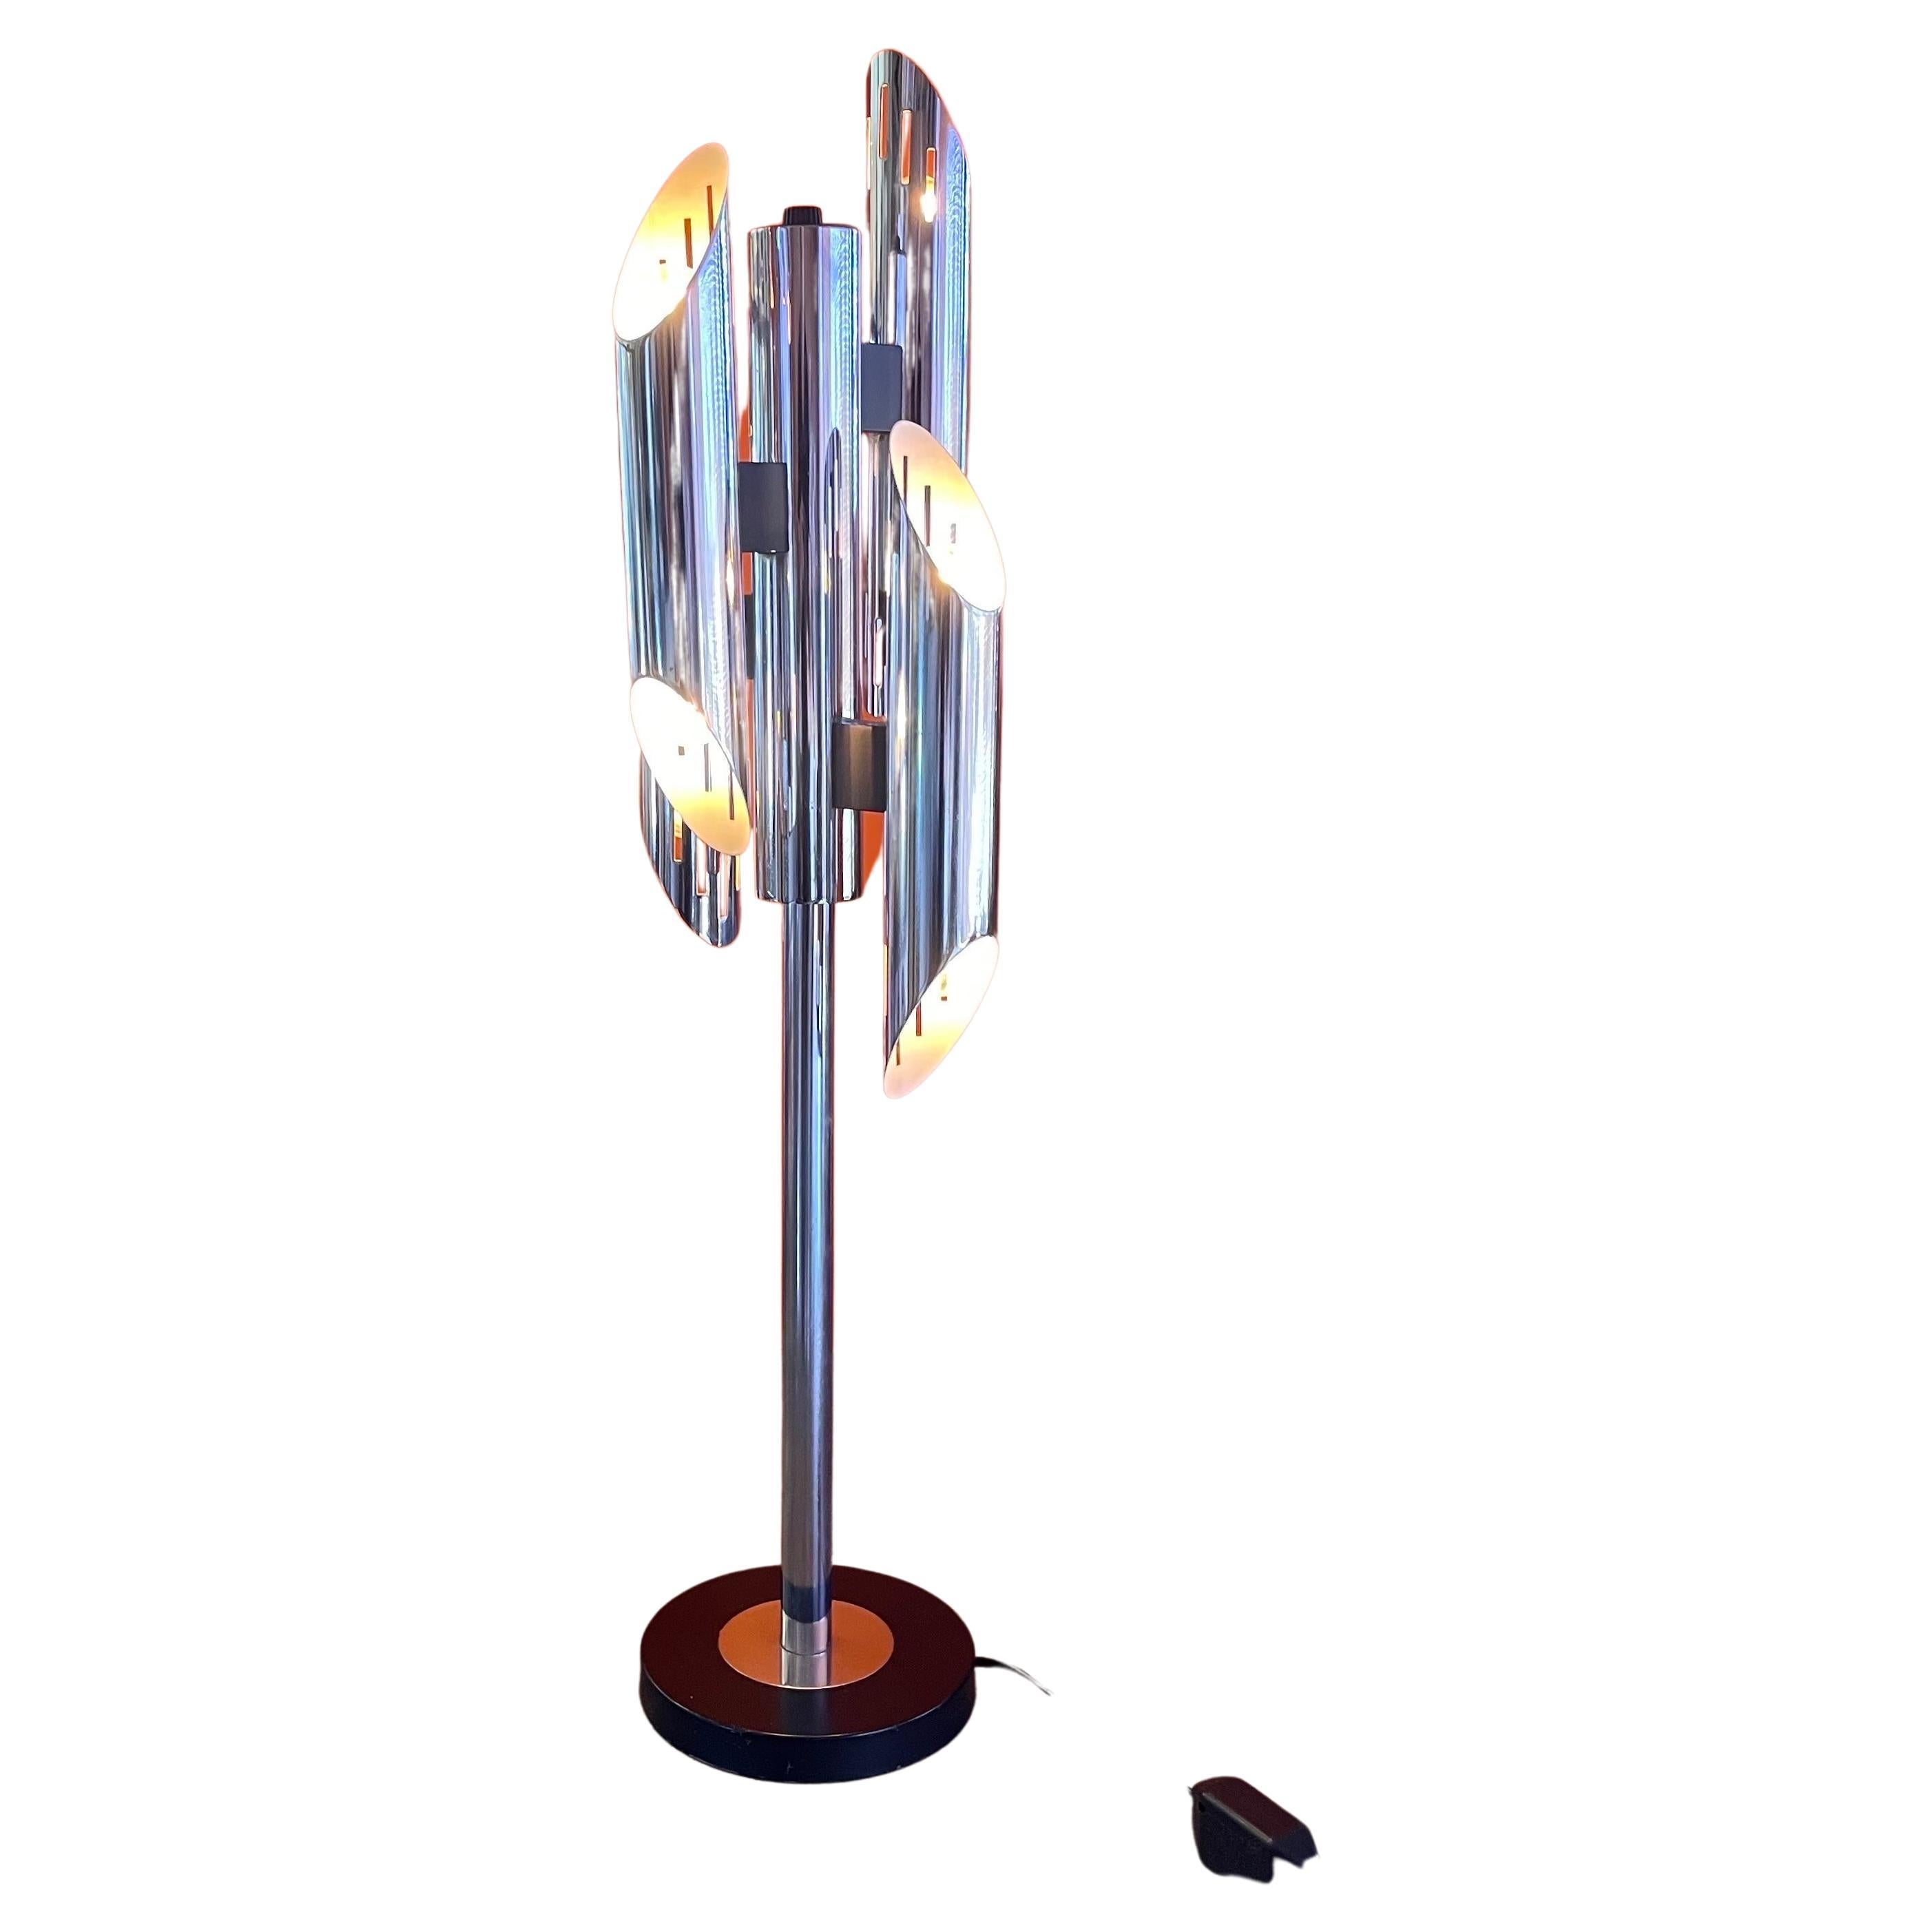 Mid-century geometric eight socket chrome table lamp by Gaetano Sciolari, circa 1970s.   A mid-century original both glamourous and sculptural!  Consisting of highly polished chrome with black painted metal, the lamp has eight lighted sockets and a